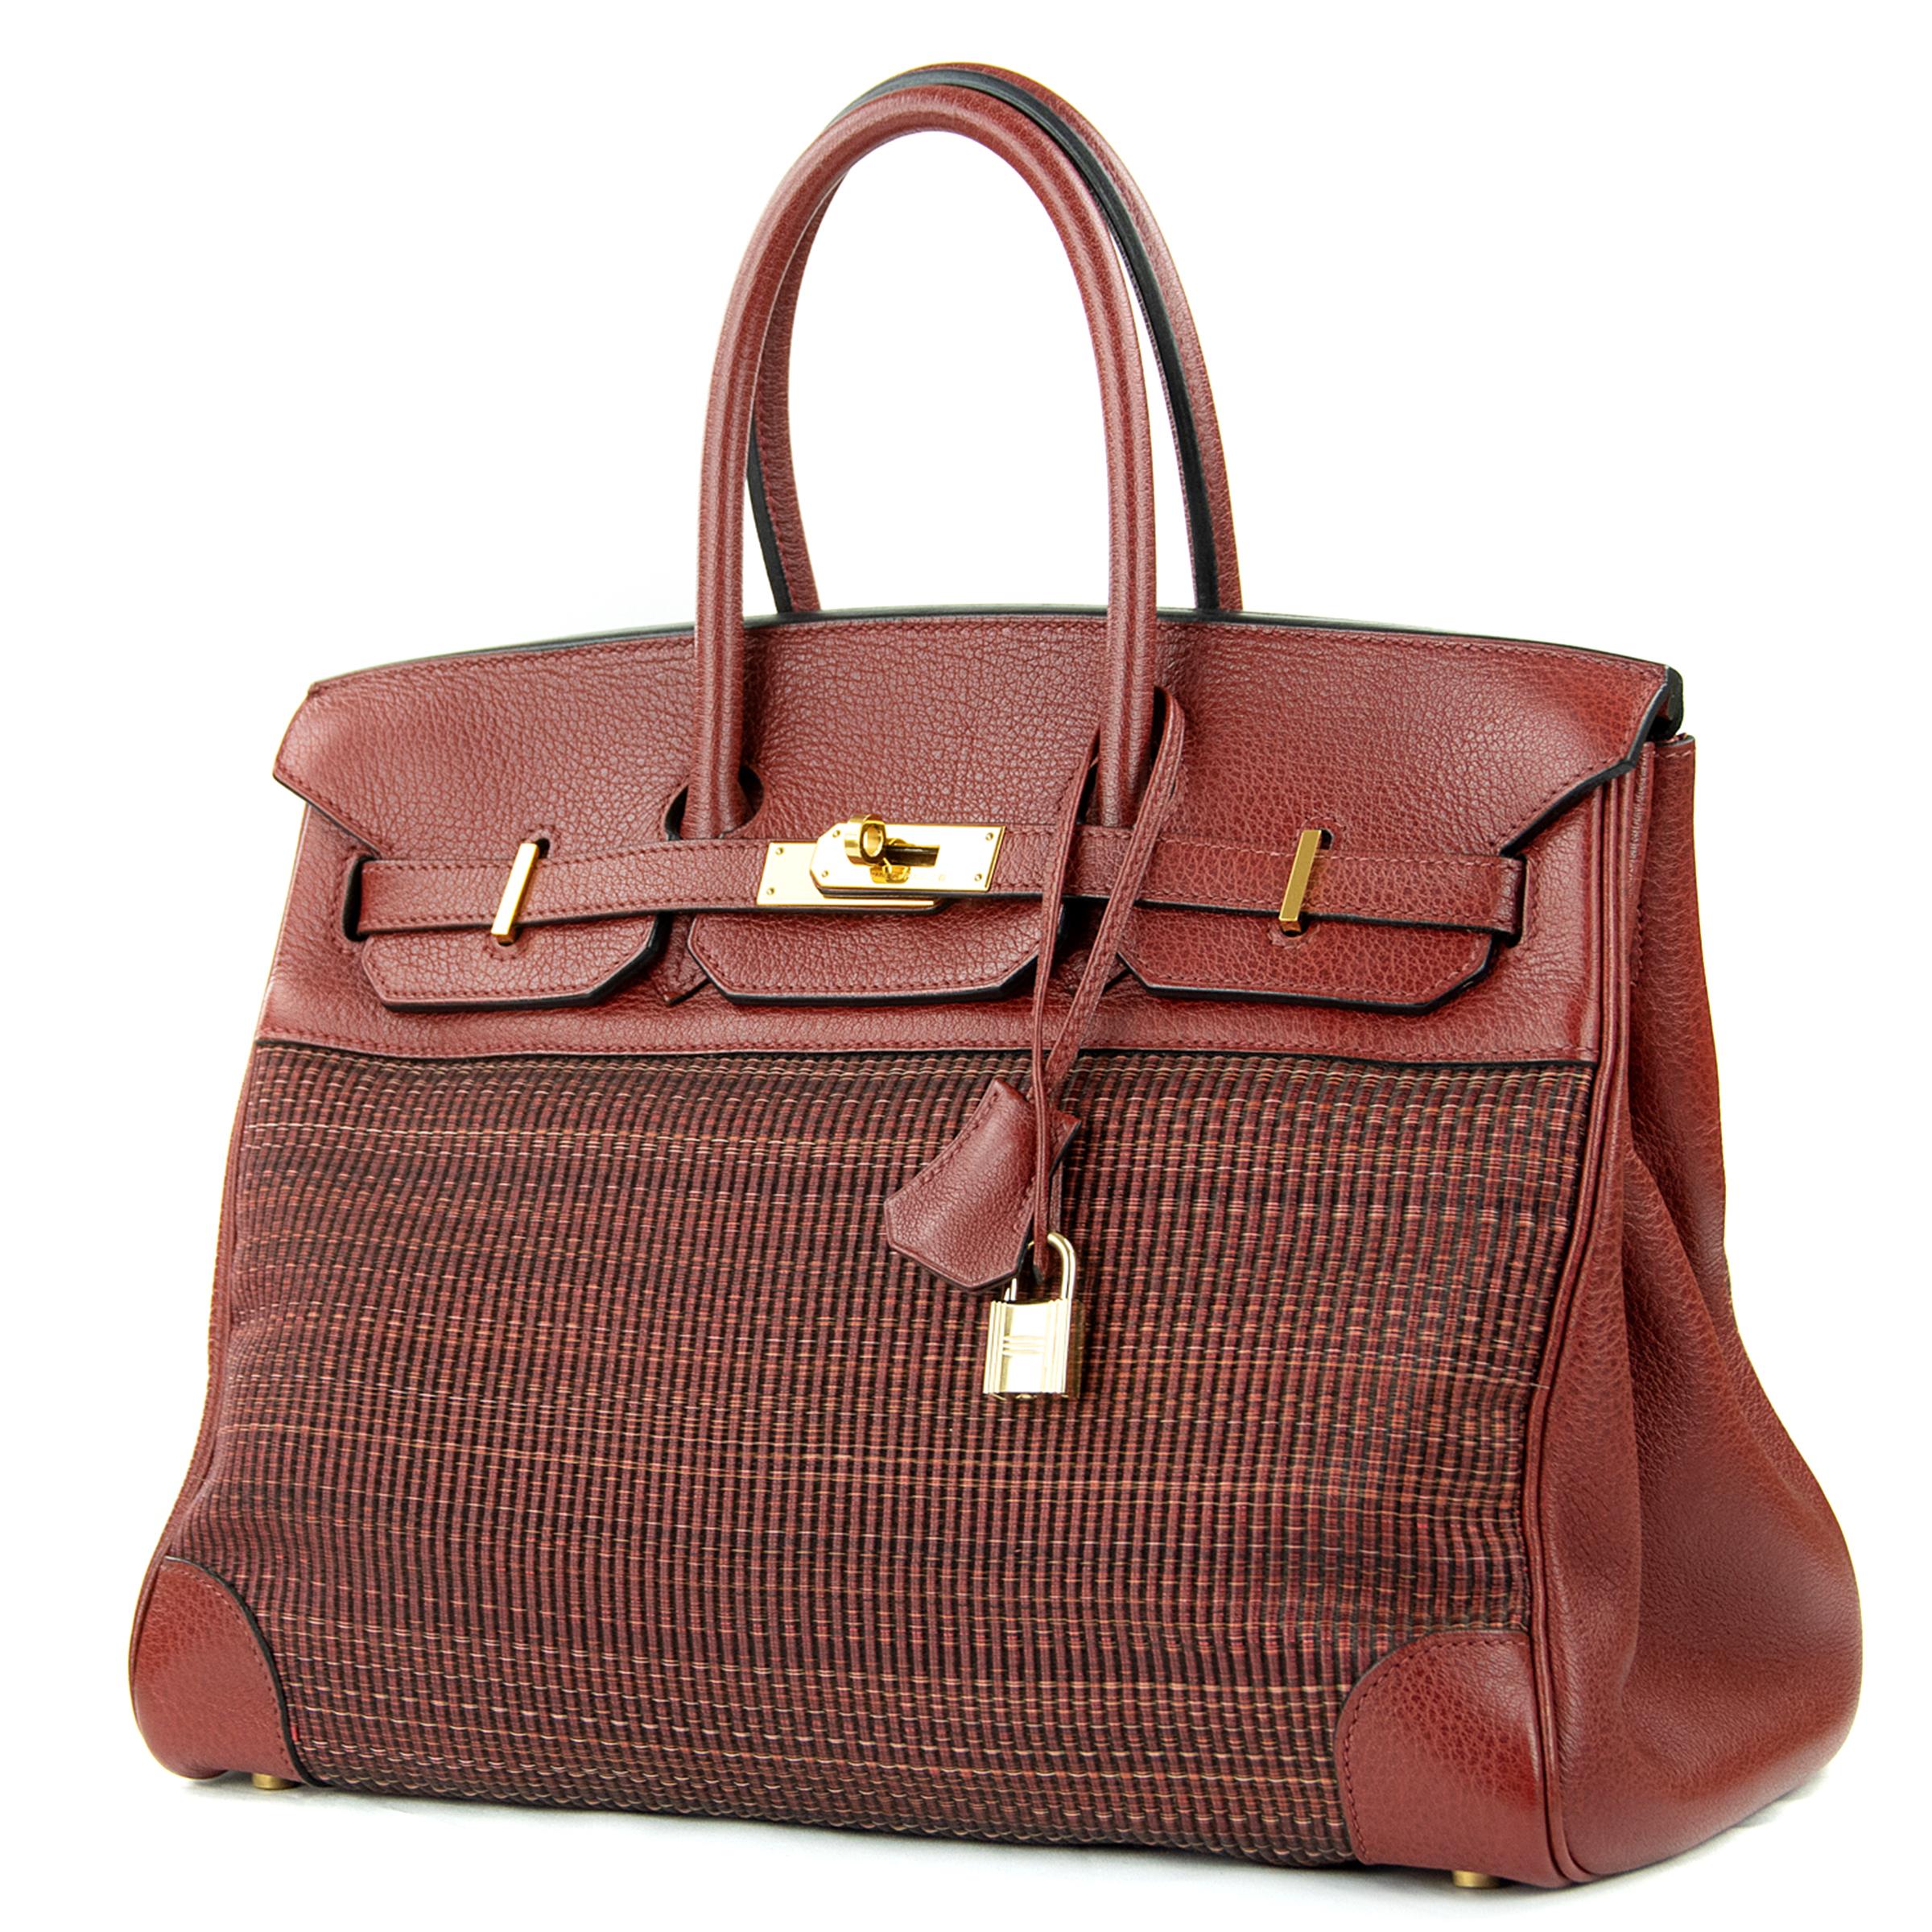 Extremely rare Hermes 35cm Birkin bag in Rouge H Buffalo Crinoline. This iconic special order Hermes Birkin bag is timeless and chic. Fresh and crisp with gold hardware.

    Condition: Excellent, Previously Used
    Made in France
    Bag Measures: